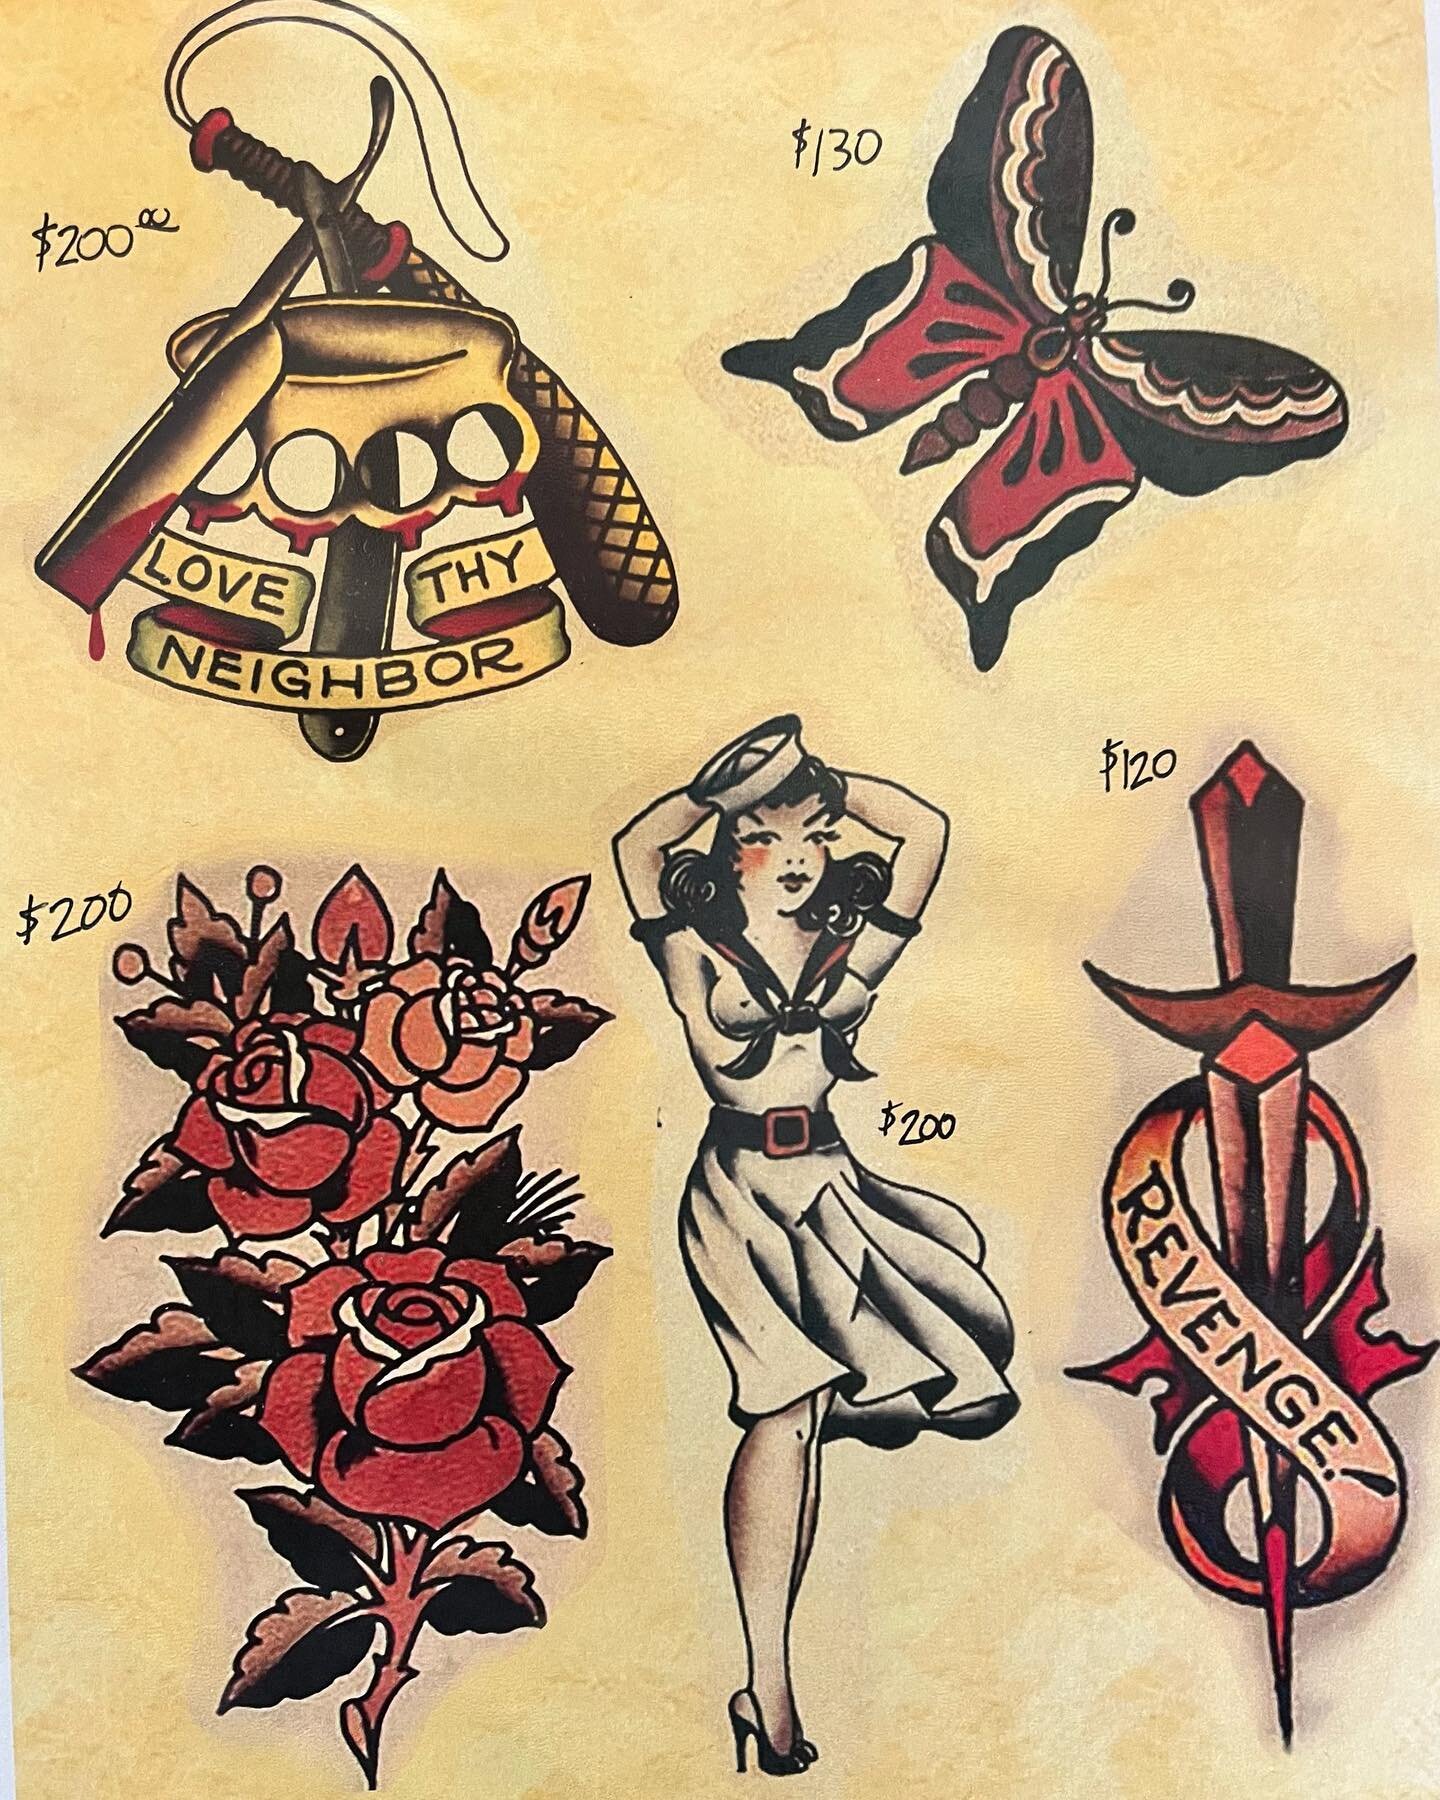 Hey guys! Jason ( @tattoozen ) has time for a few sailor jerry walk in specials tomorrow from 11-6.
Pre-priced and sized designs for a great price!